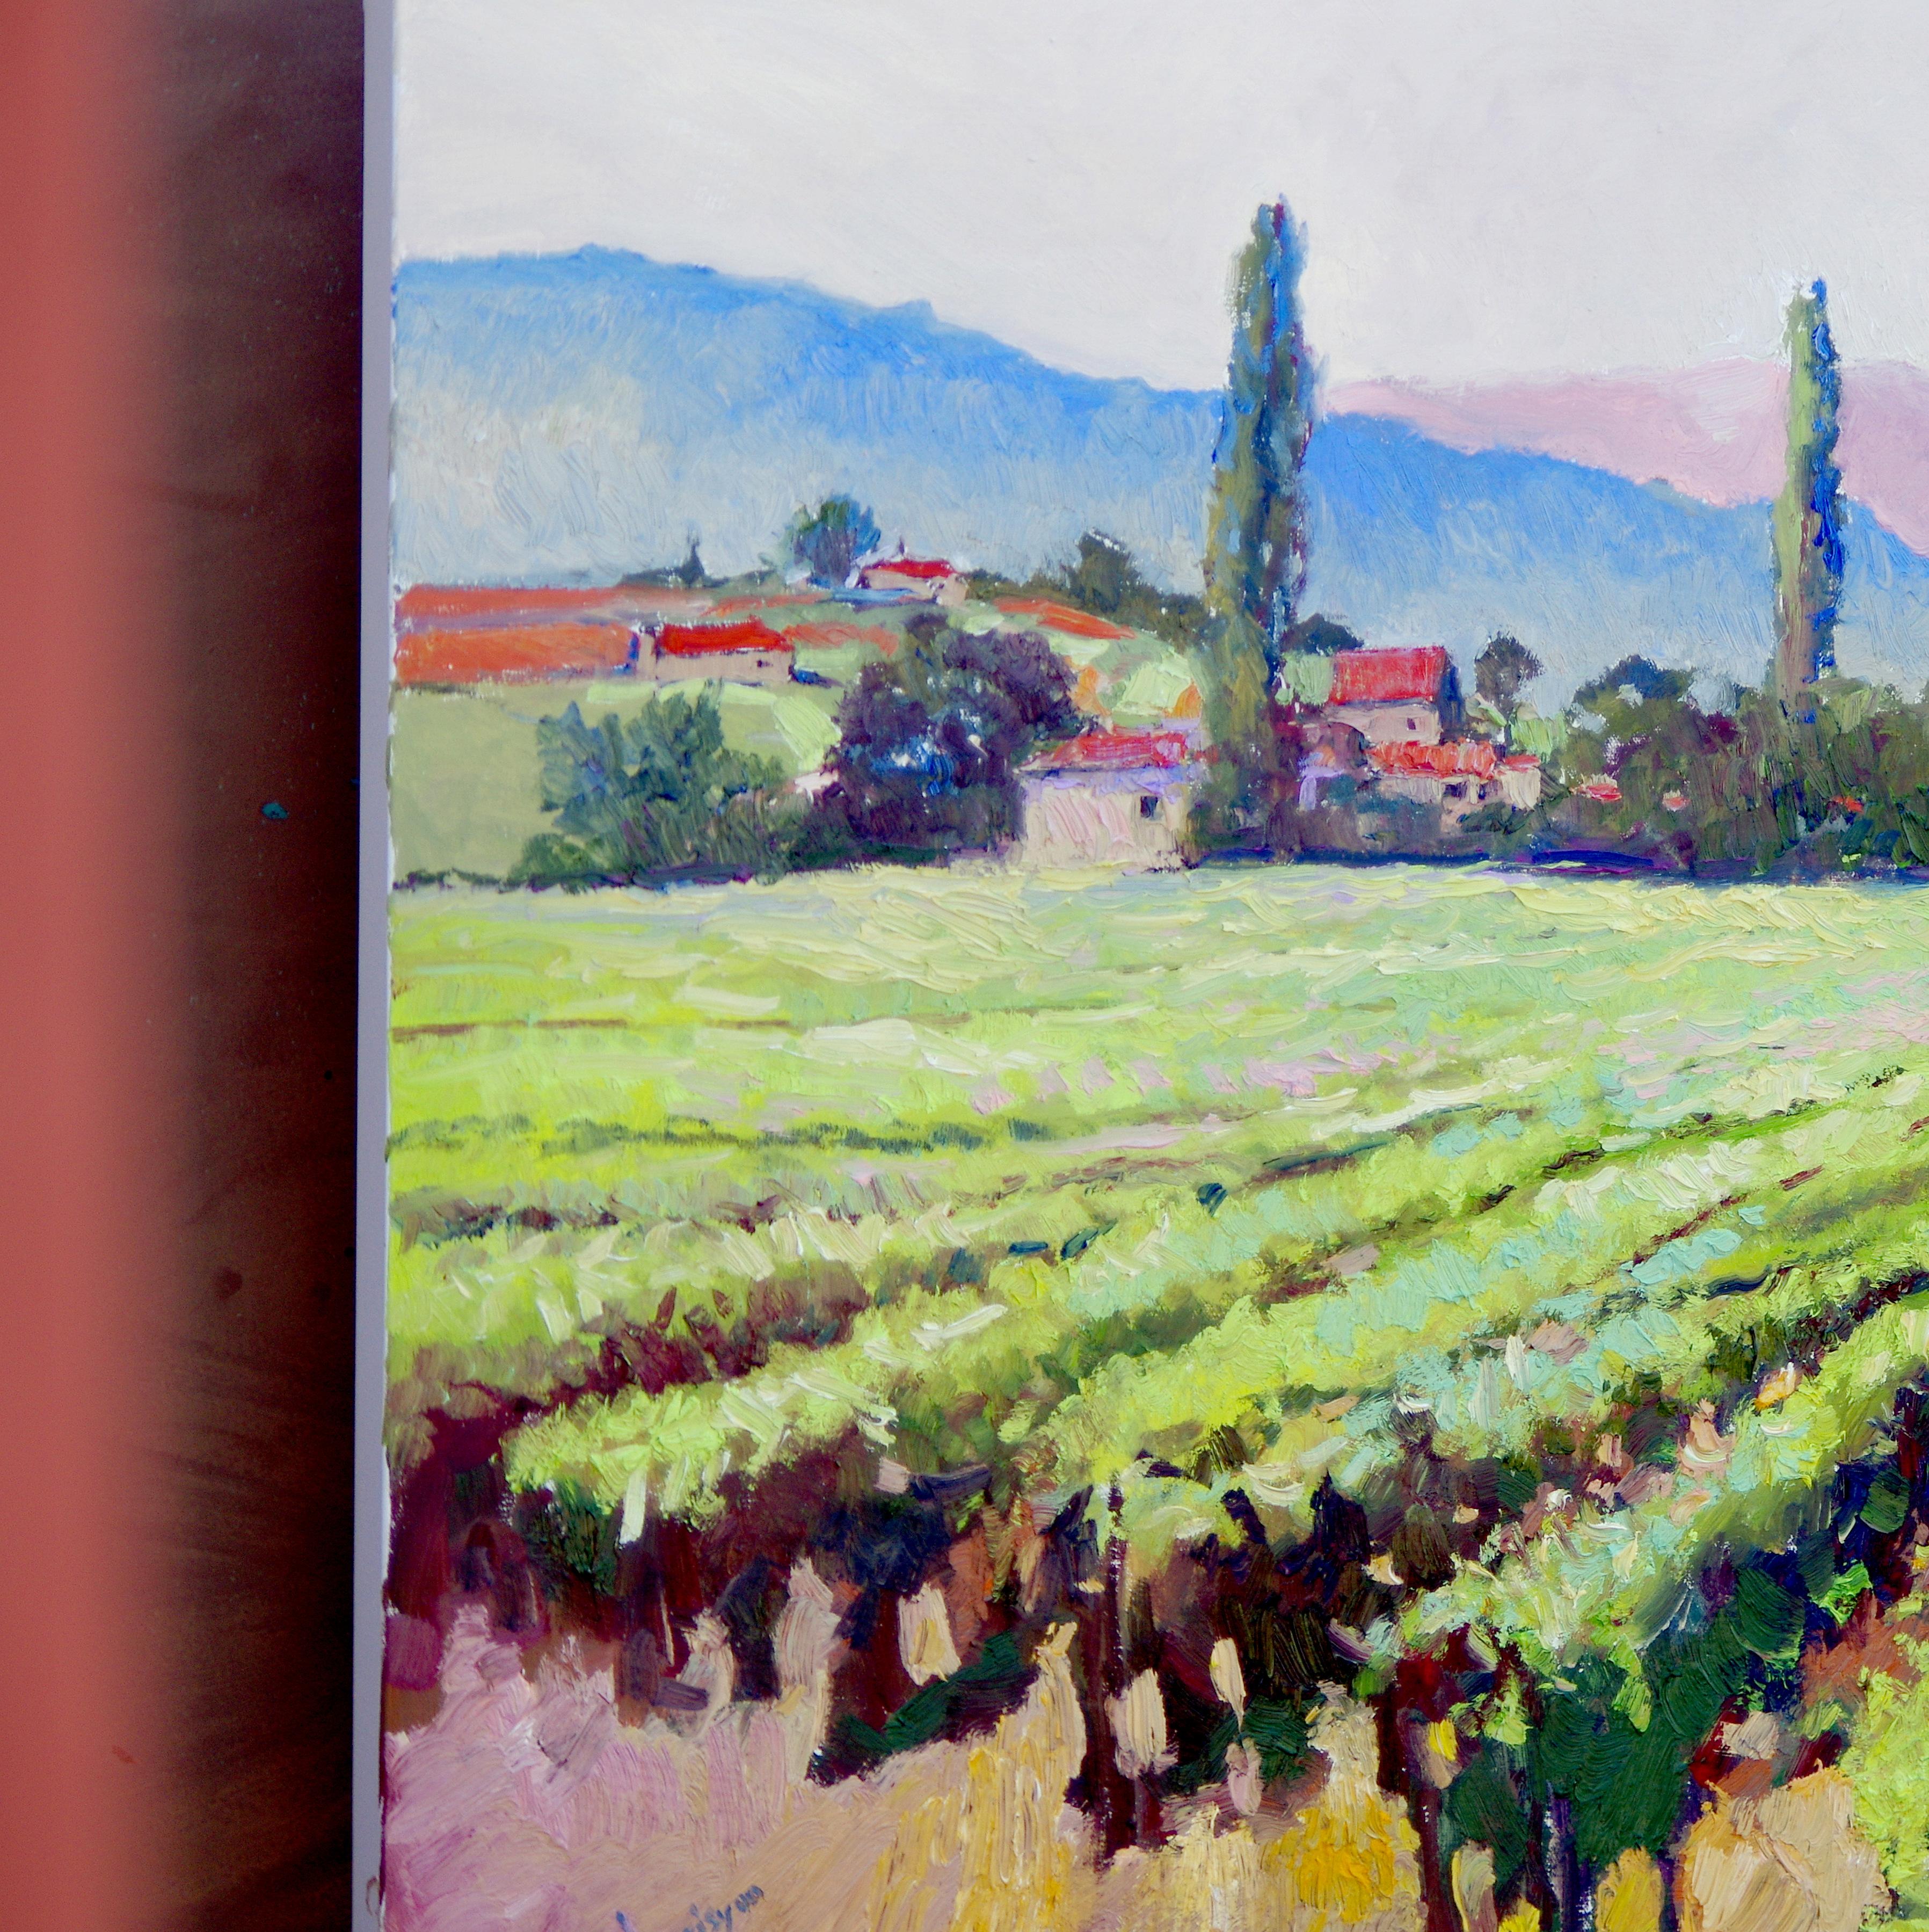 <p>Artist Comments<br>California vineyards are one of the most beautiful areas in the world. Early morning sunlight touches the nature and fills it with positive energy. The scene is beautiful and harmonic.</p><br/><p>About the Artist<br>Suren is an